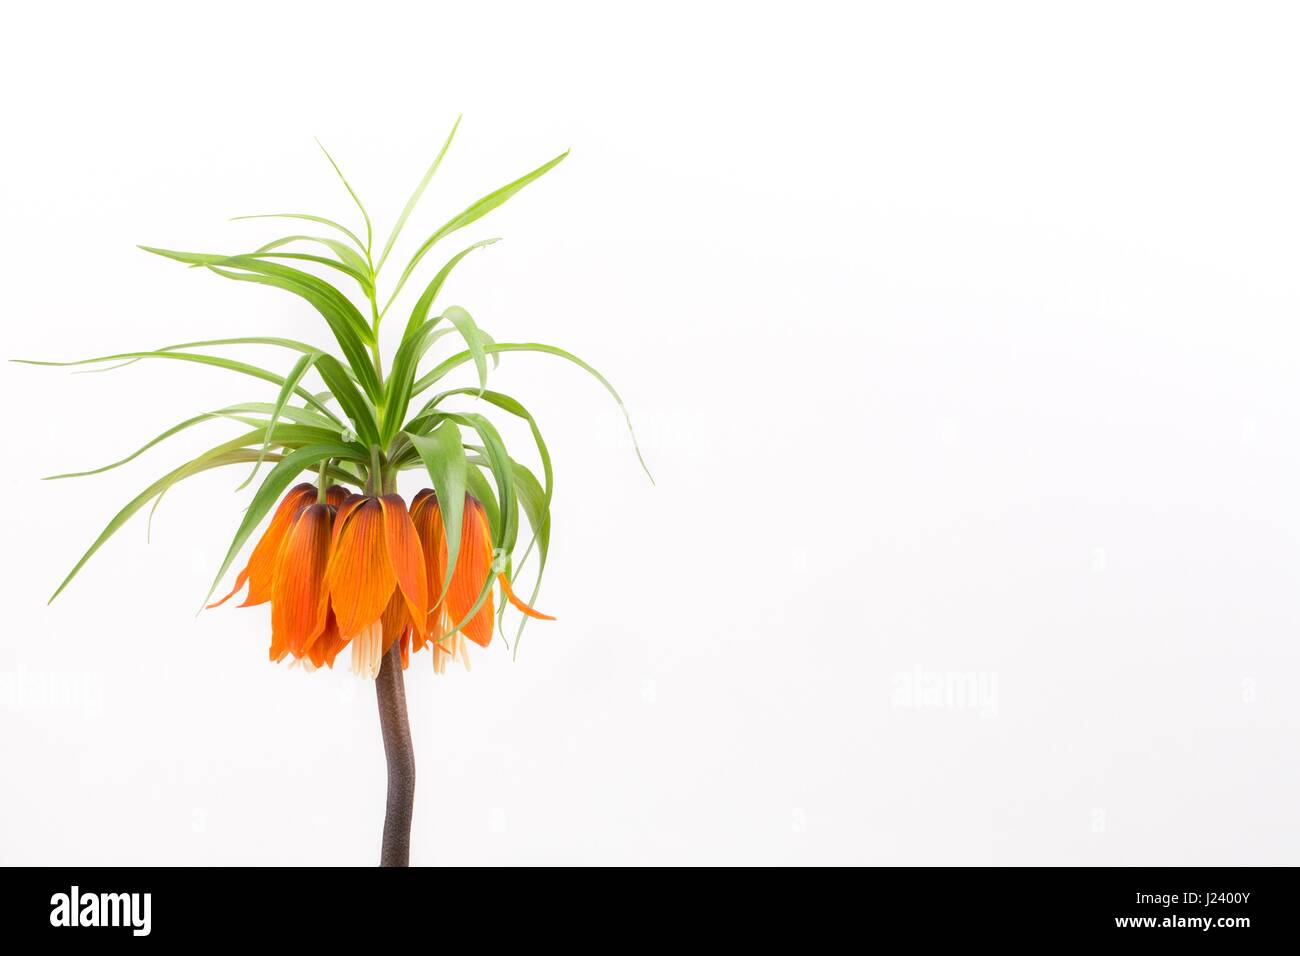 Crown imperial on a white background Stock Photo